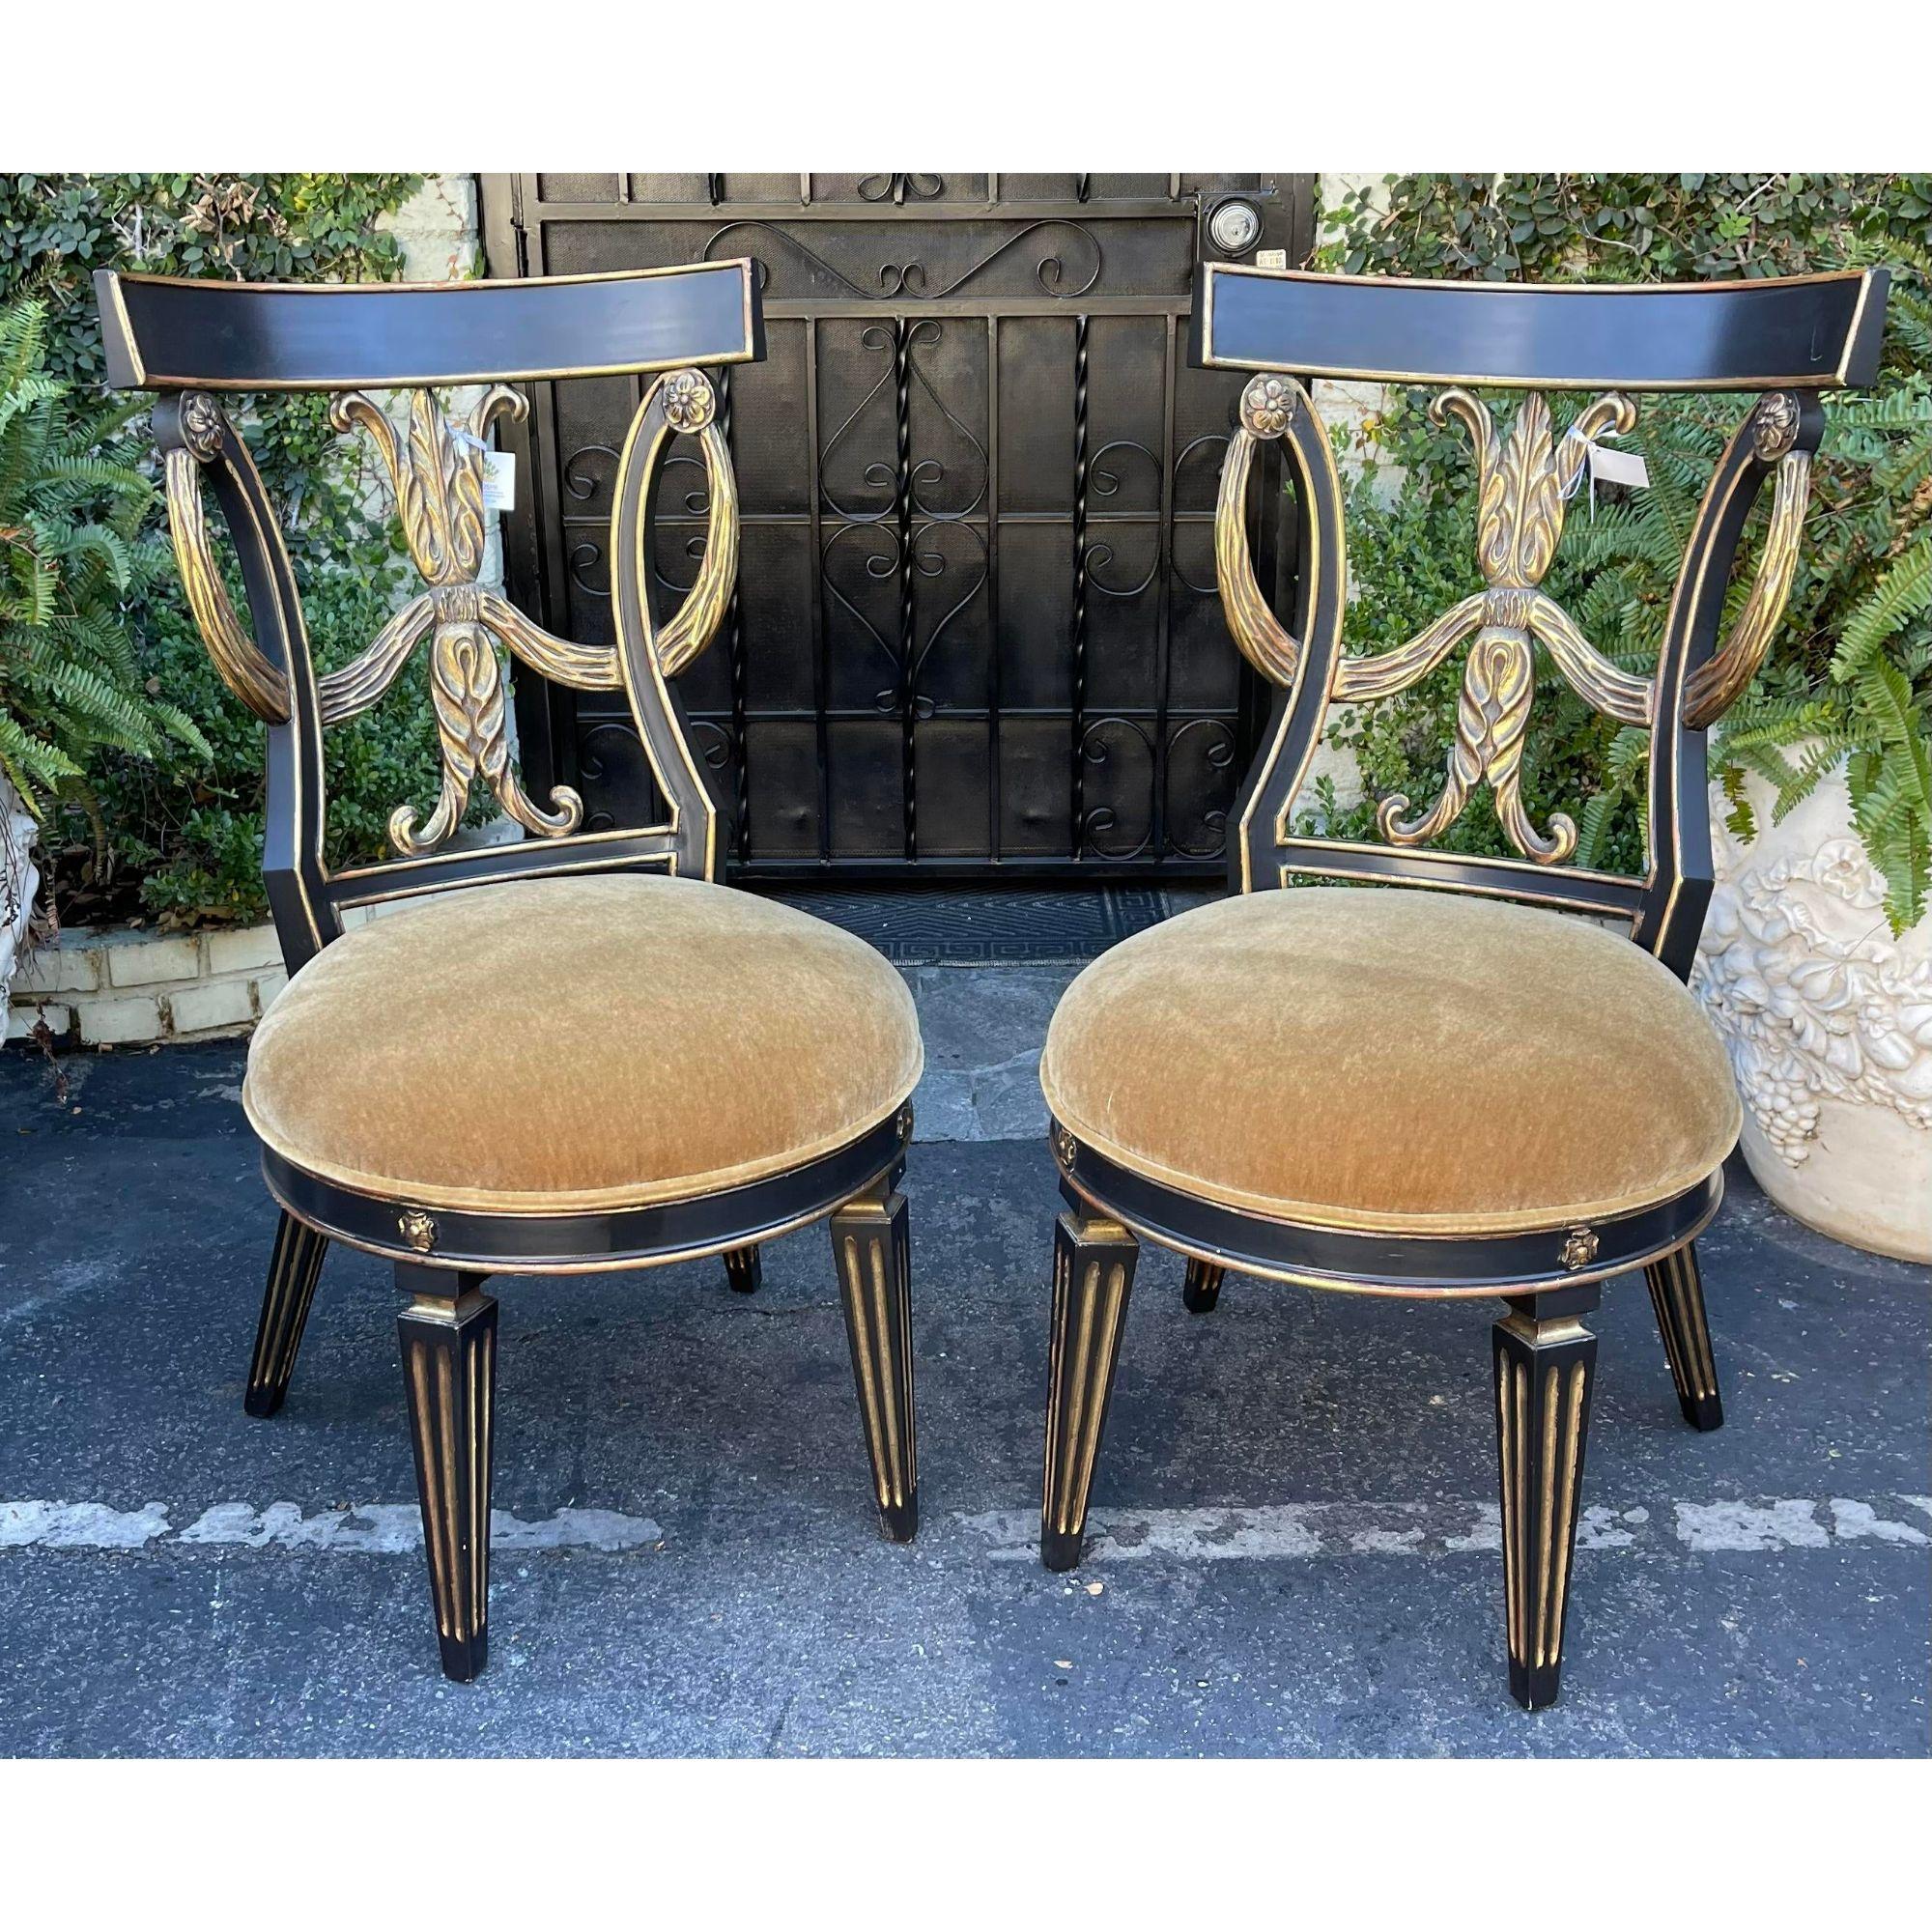 Pair of Regency style giltwood & mohair chairs by Randy Esada Designs for Prospr. They feature thick plush mohair seats and elegant ebonized giltwood frames. Gilded front and back.
Sold in pairs. Two pair available.

Additional